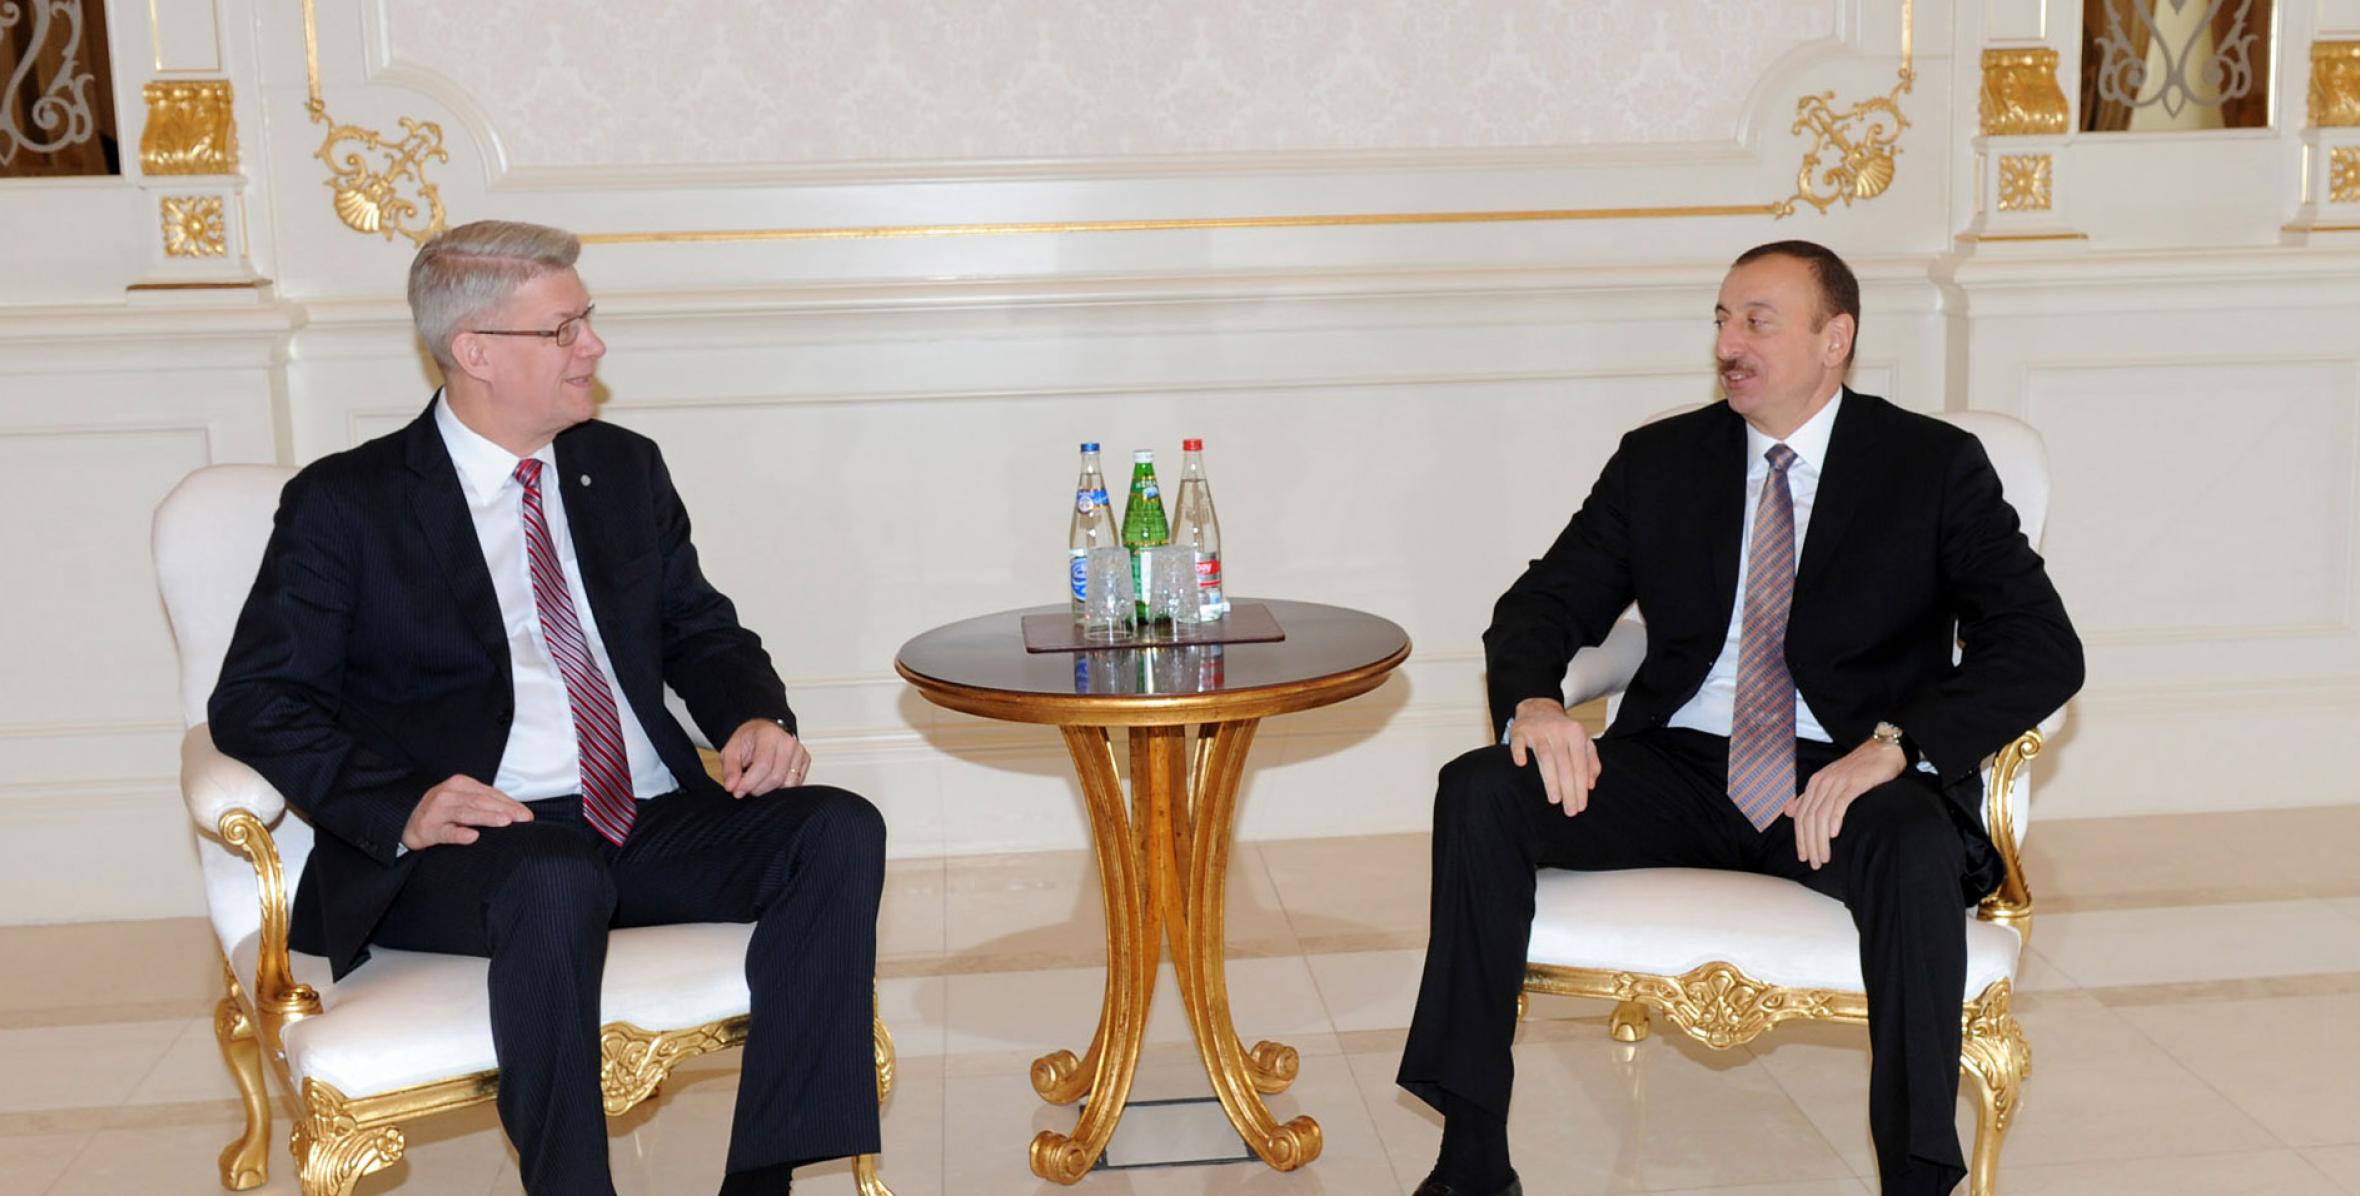 Ilham Aliyev received the former president of the Republic of Latvia and the chairman of the “Zatlers’ Reform Party”, Valdis Zatlers